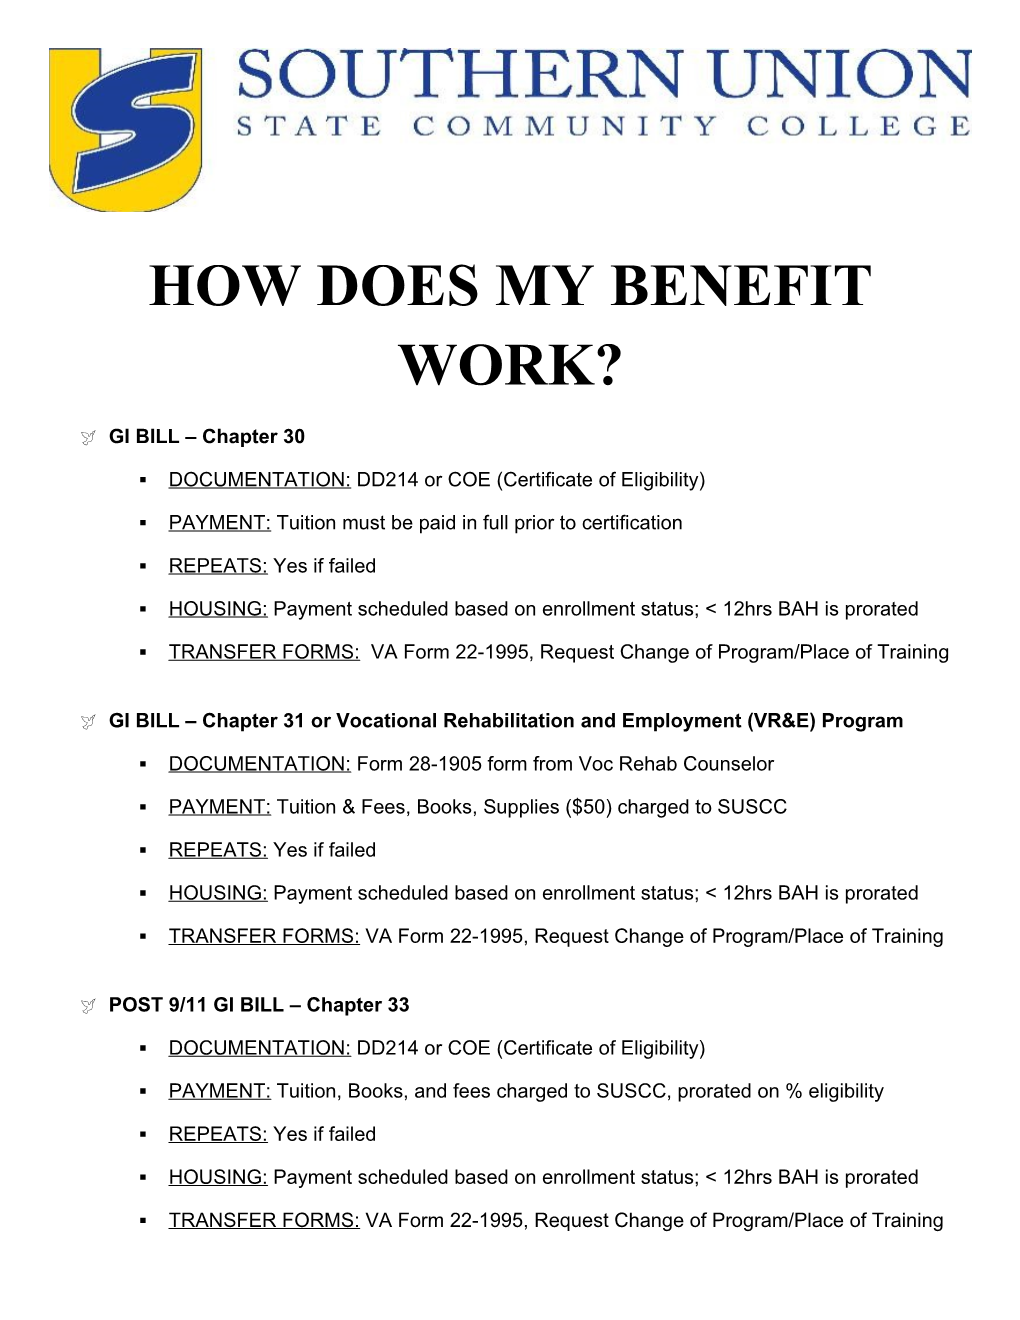 How Does My Benefit Work?